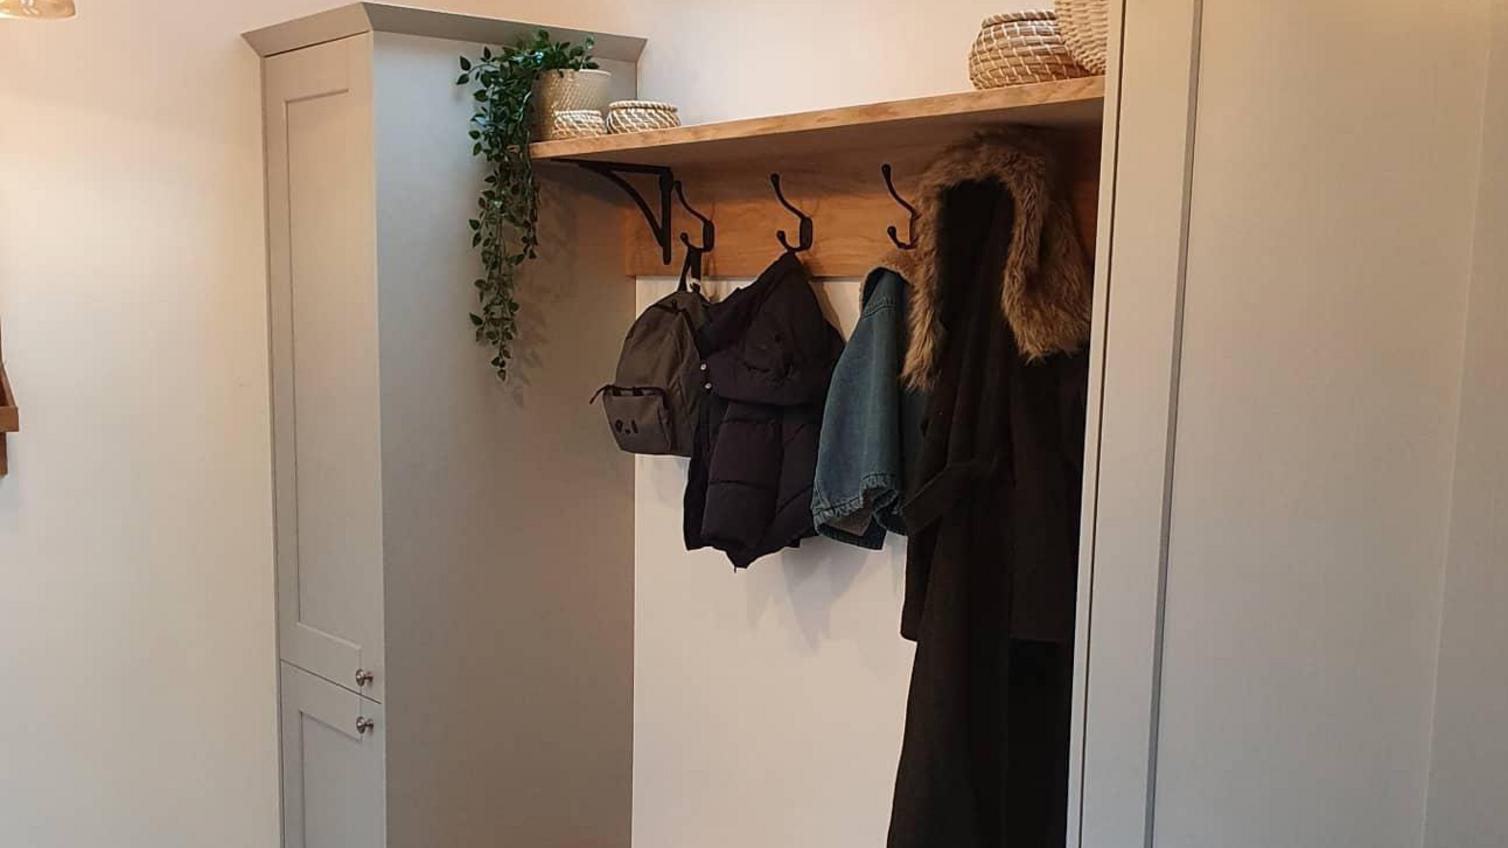 Grey boot room idea using shaker kitchen doors and tower units. Includes coat rack and bench.